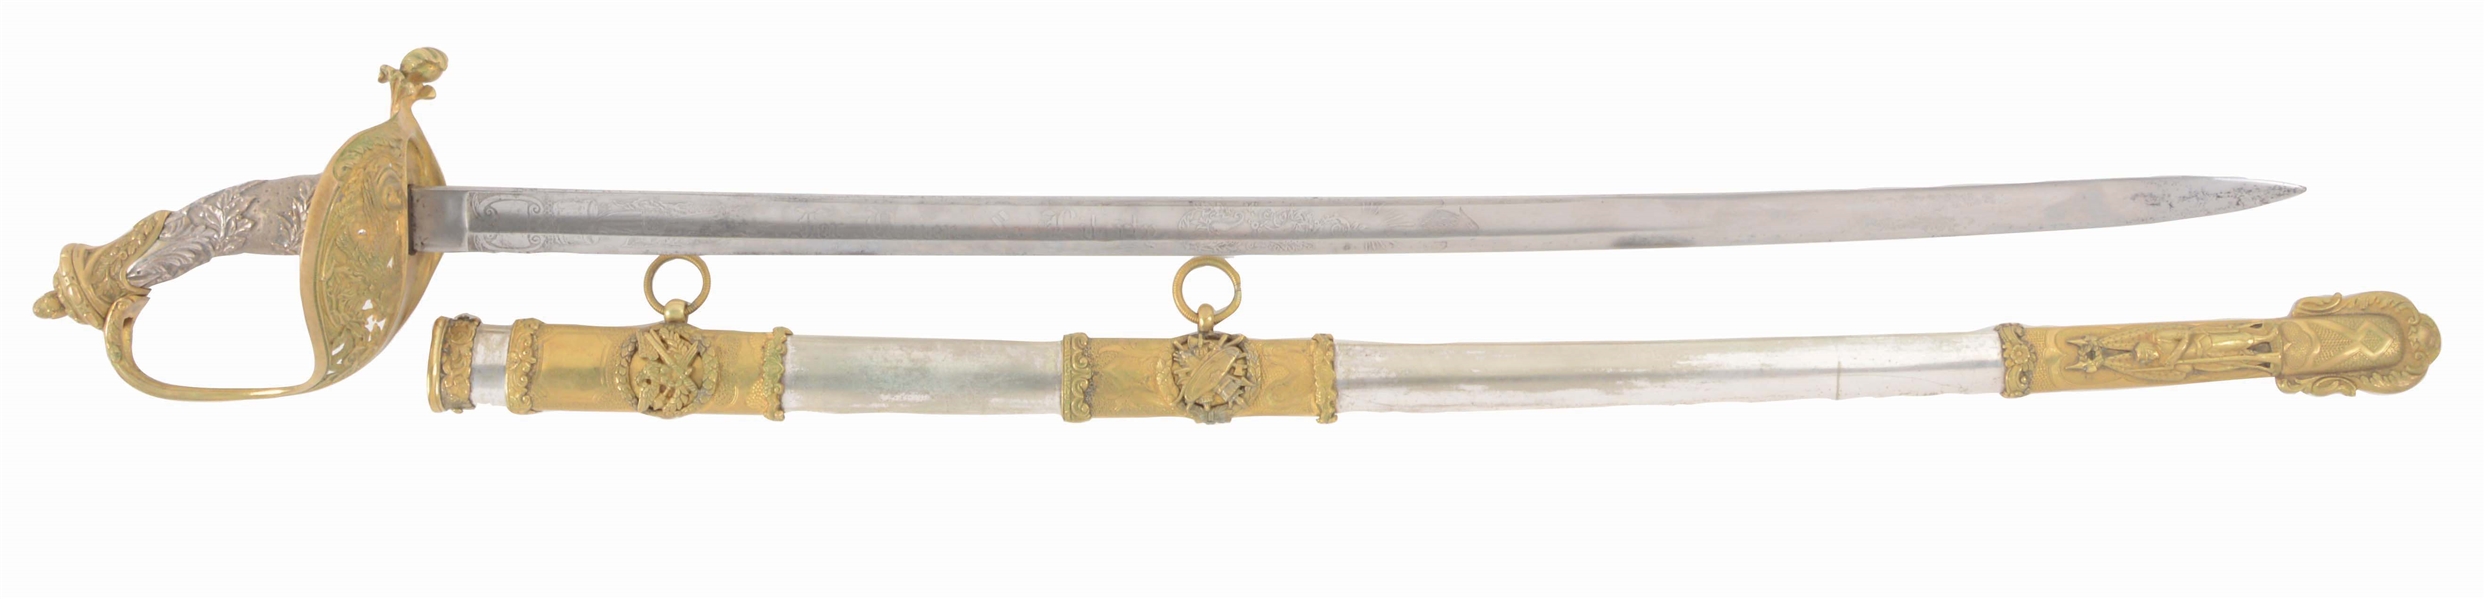 FINE PRESENTATION SABER OF MAJOR JAMES GIVEN, 7TH PA CAVALRY.